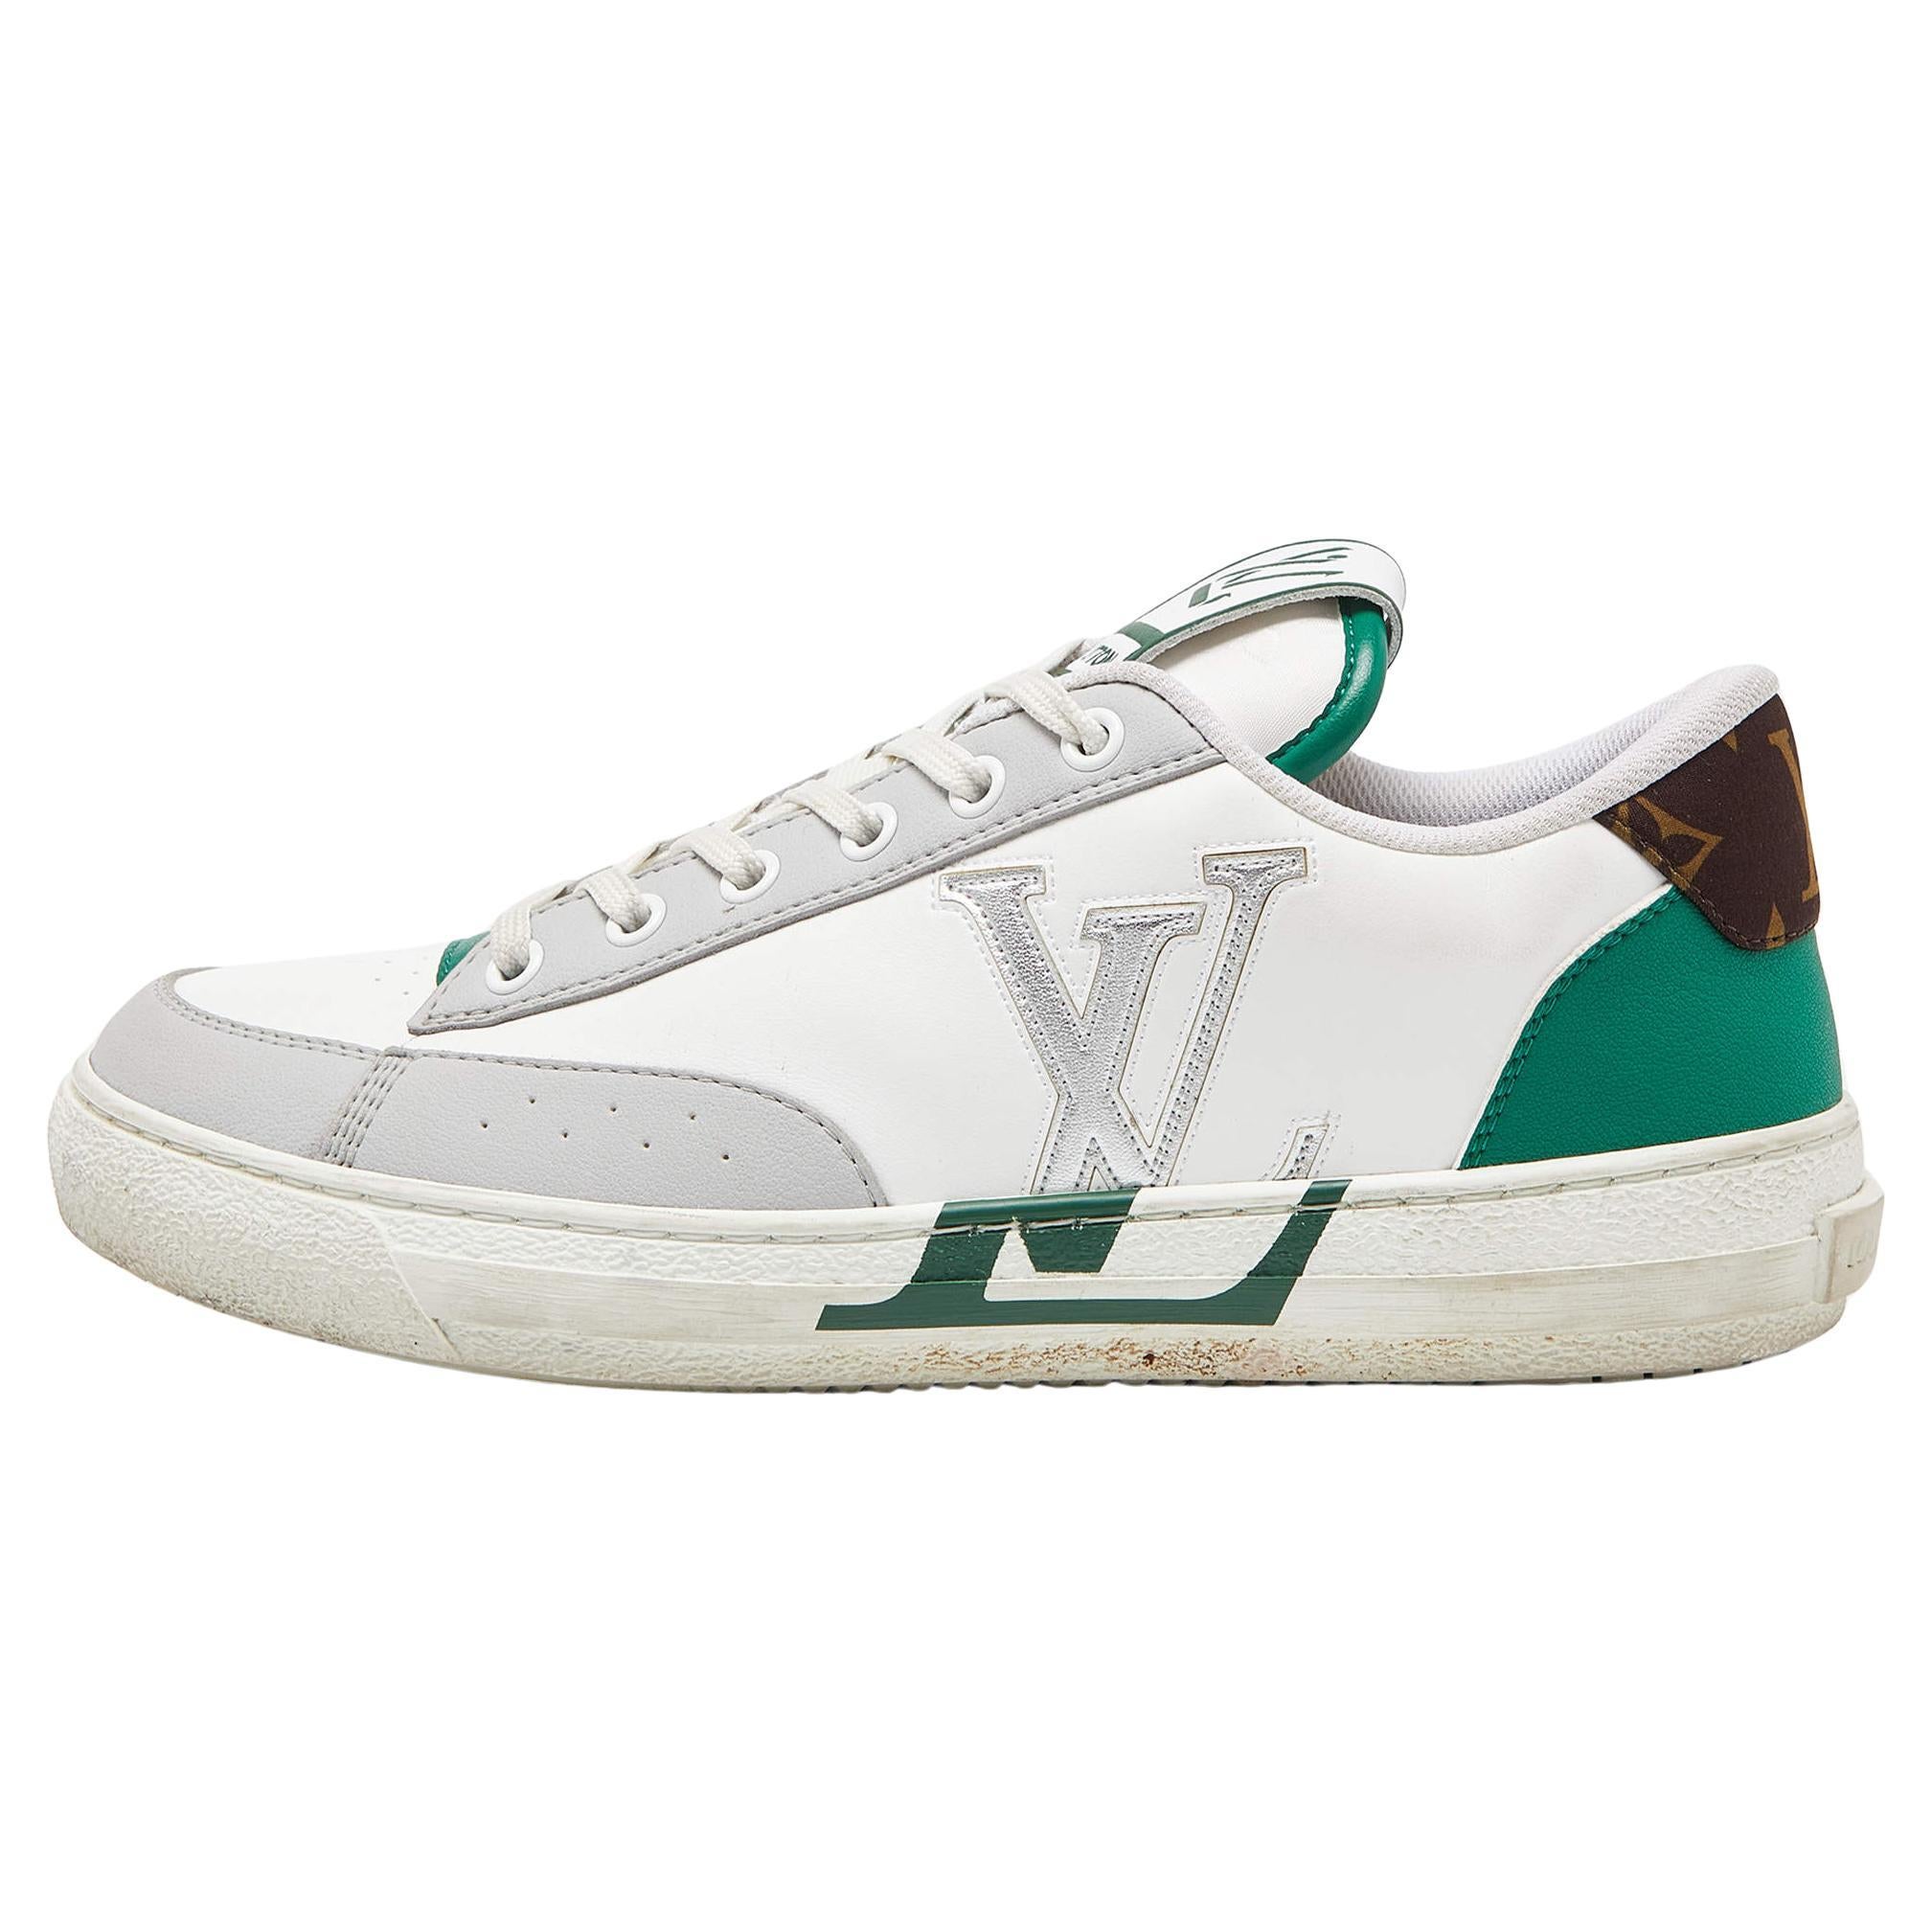 Louis Vuitton White/Green Leather Charlie Sneakers Size 39